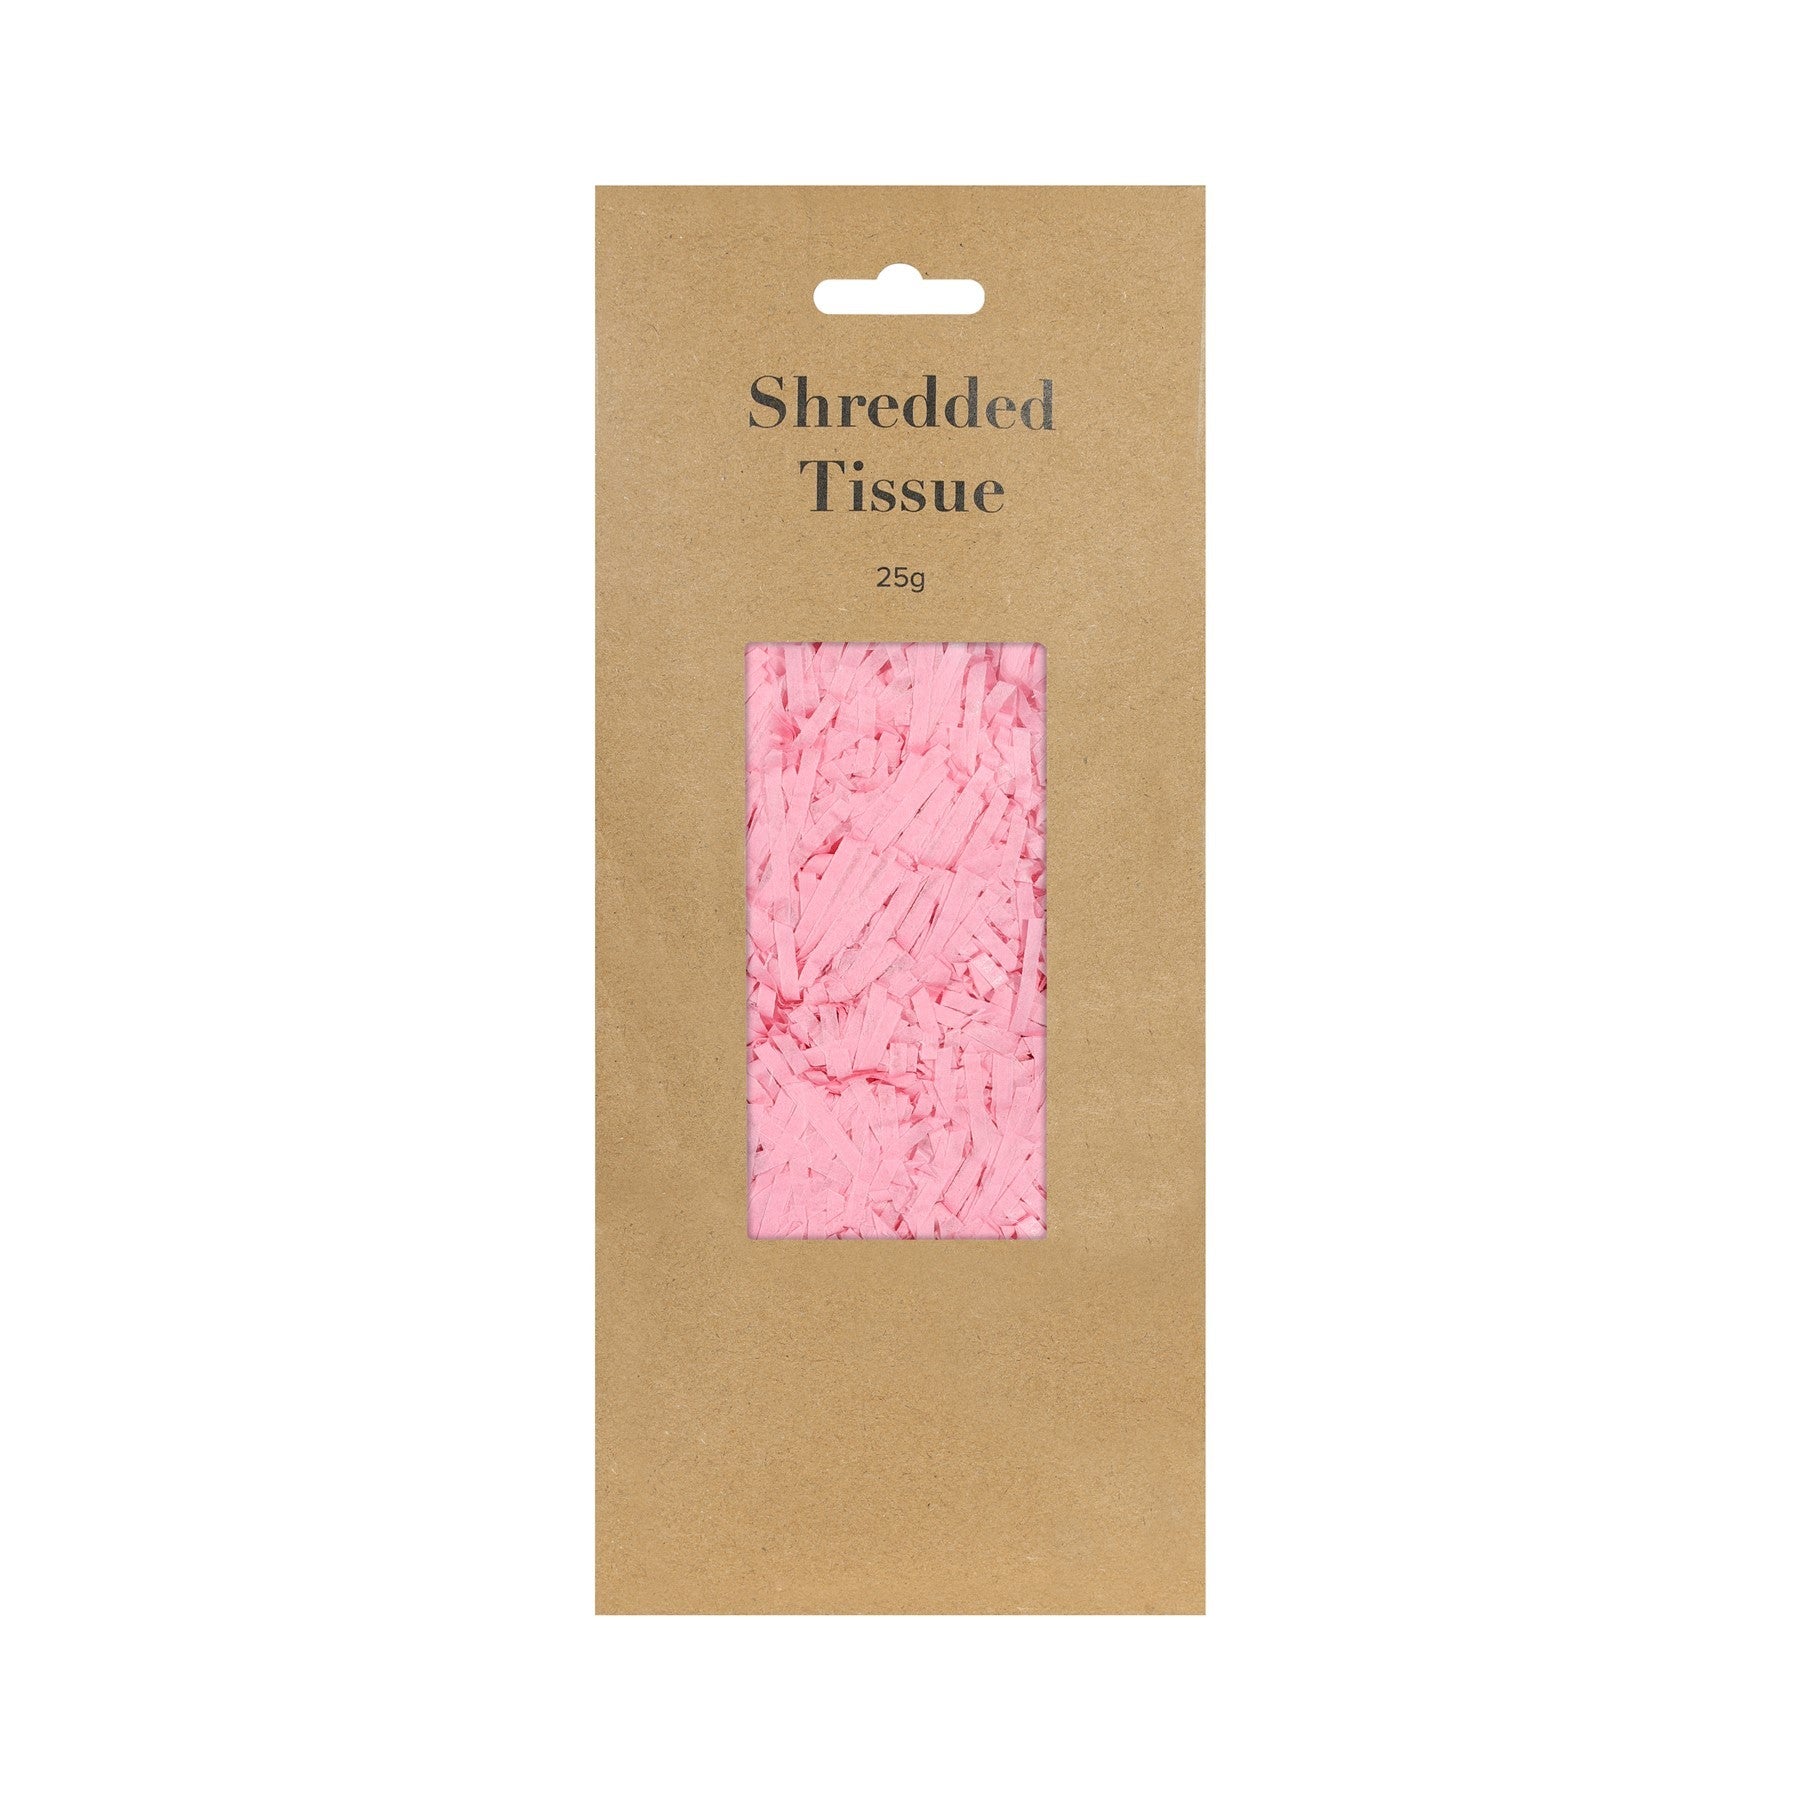 View Pale Pink Shredded Tissue 25g information